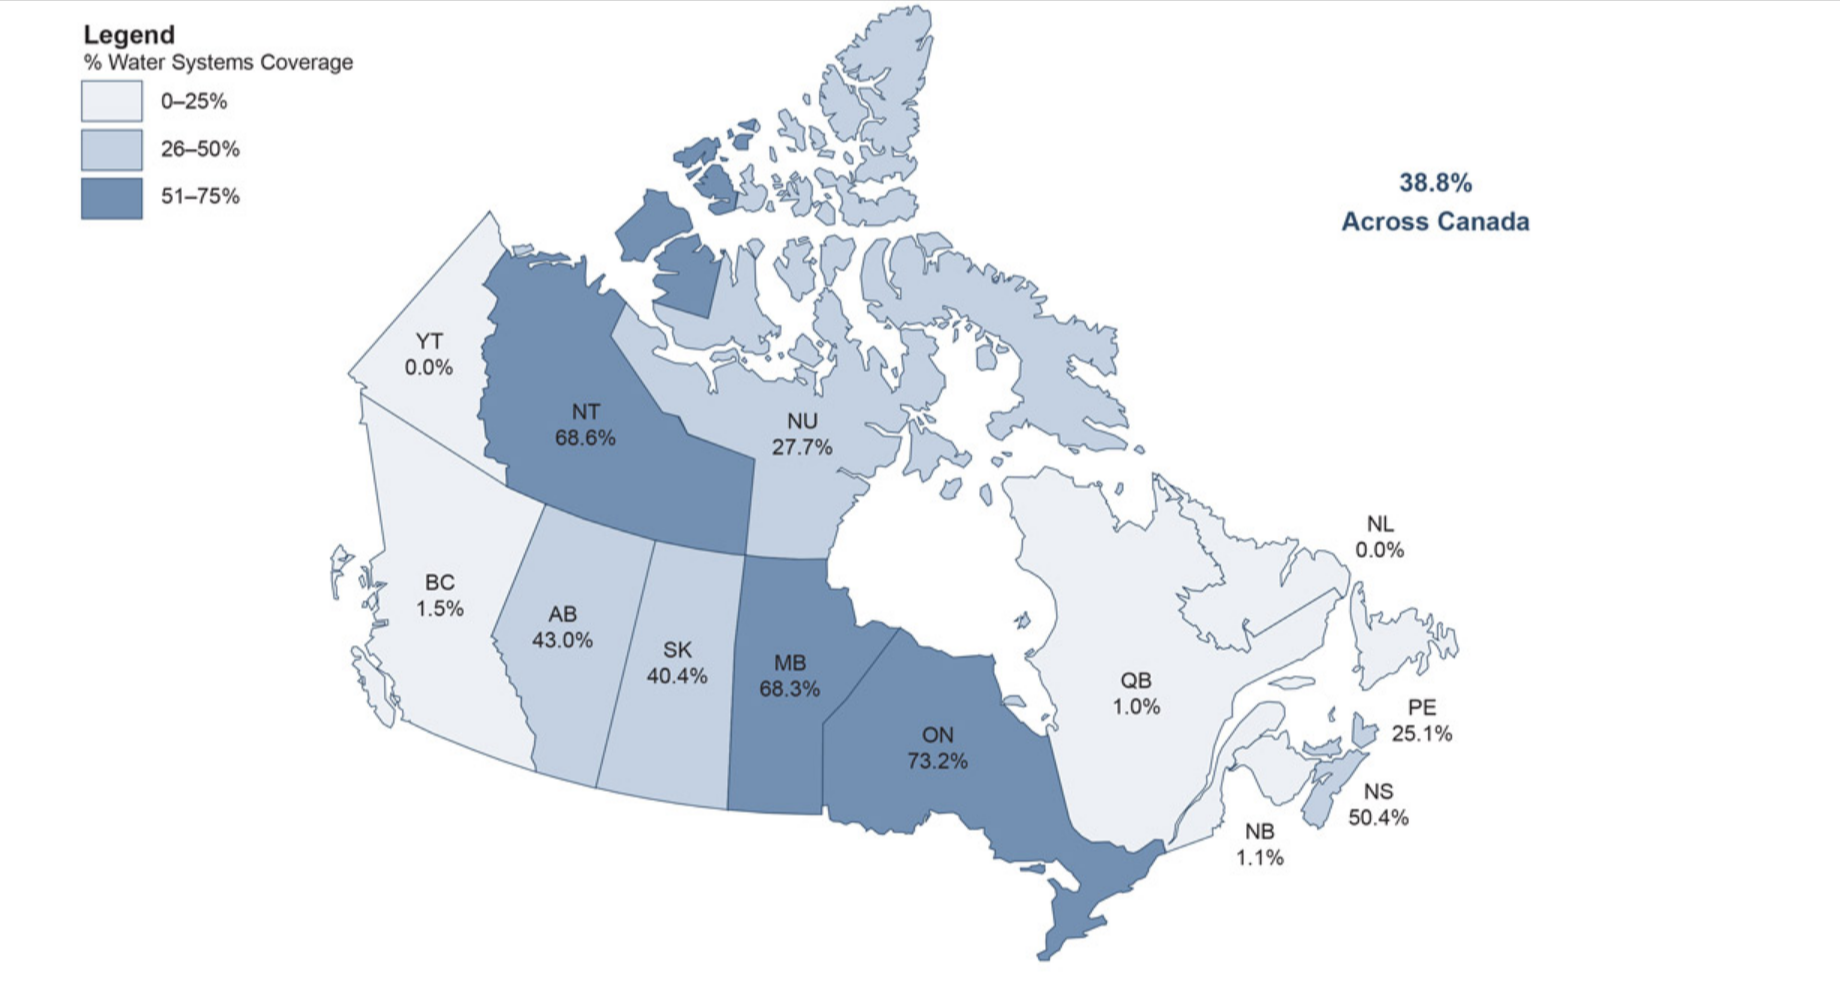 Chief Dental Officer of Canada Releases Report on “The State of Community Water Fluoridation across Canada”